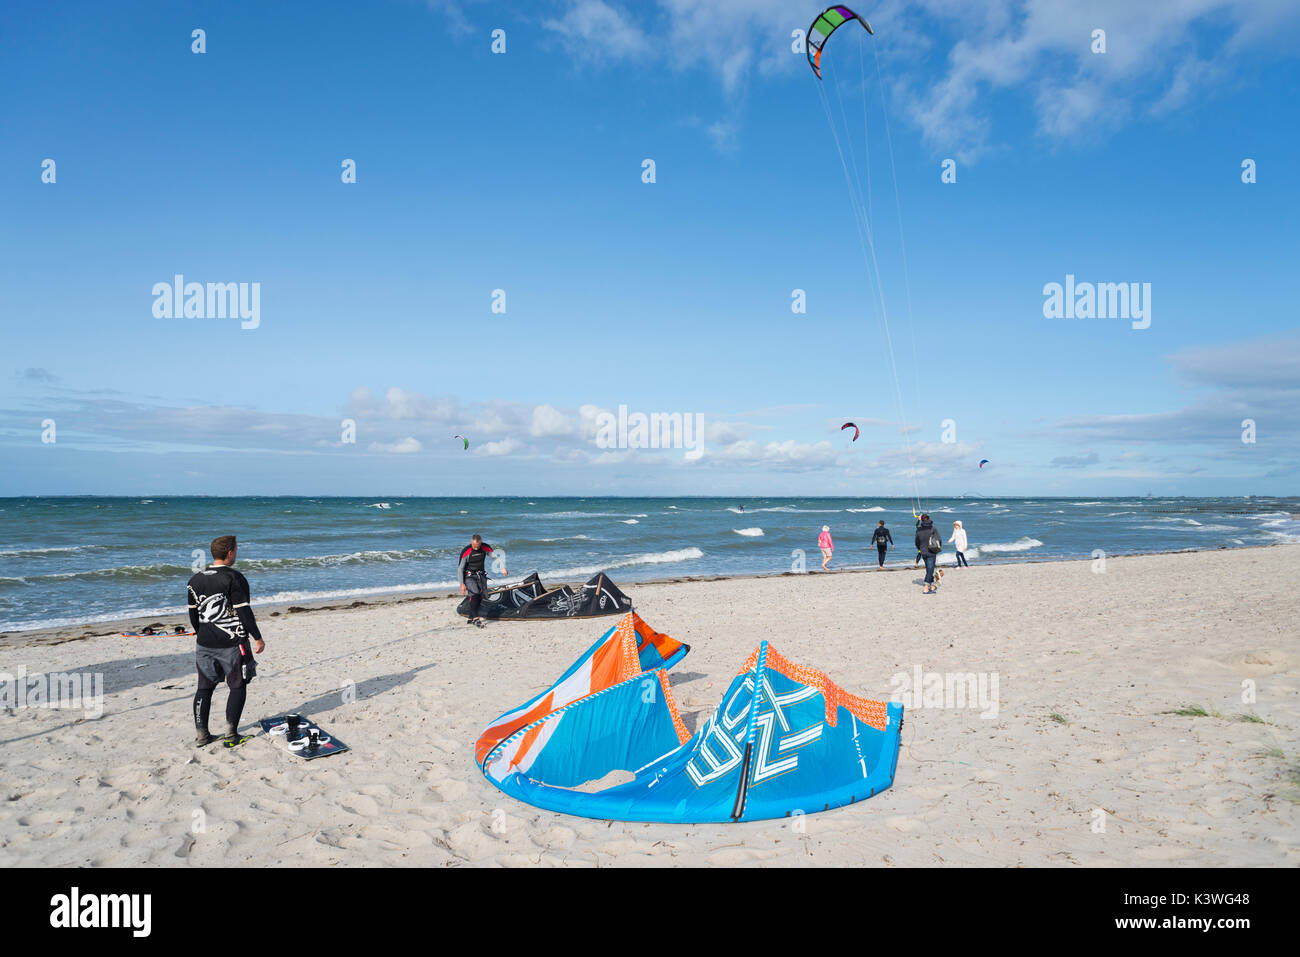 Kite surfer preparing at the beach and surfing on the sea at the Steinwarder beach at Heiligenhafen, Schleswig-Holstein, Germany Stock Photo